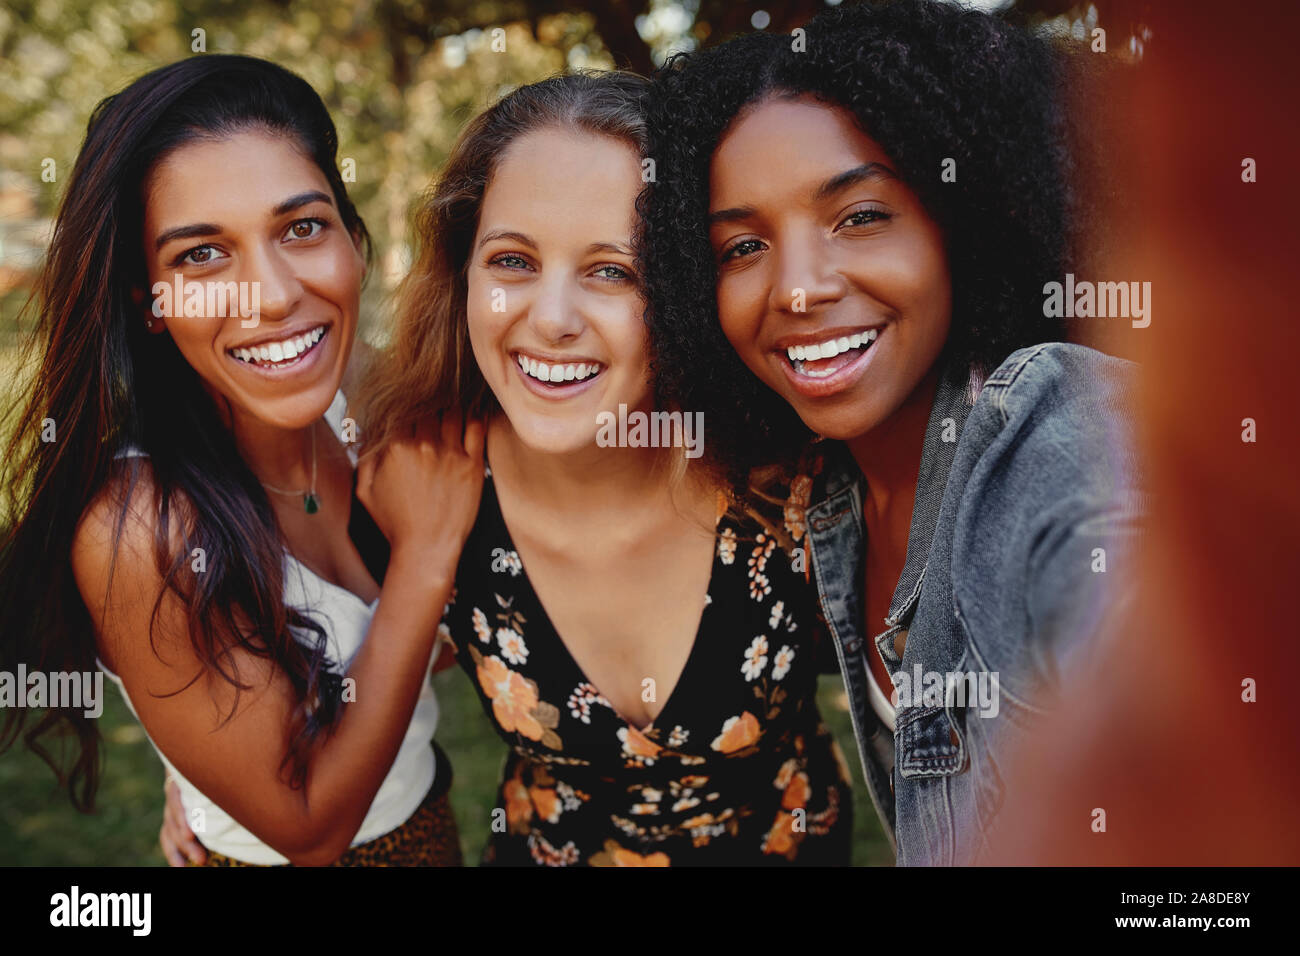 Group of happy diverse multiracial girl friends taking a selfie outdoors in the park on a sunny day smiling -  Stock Photo